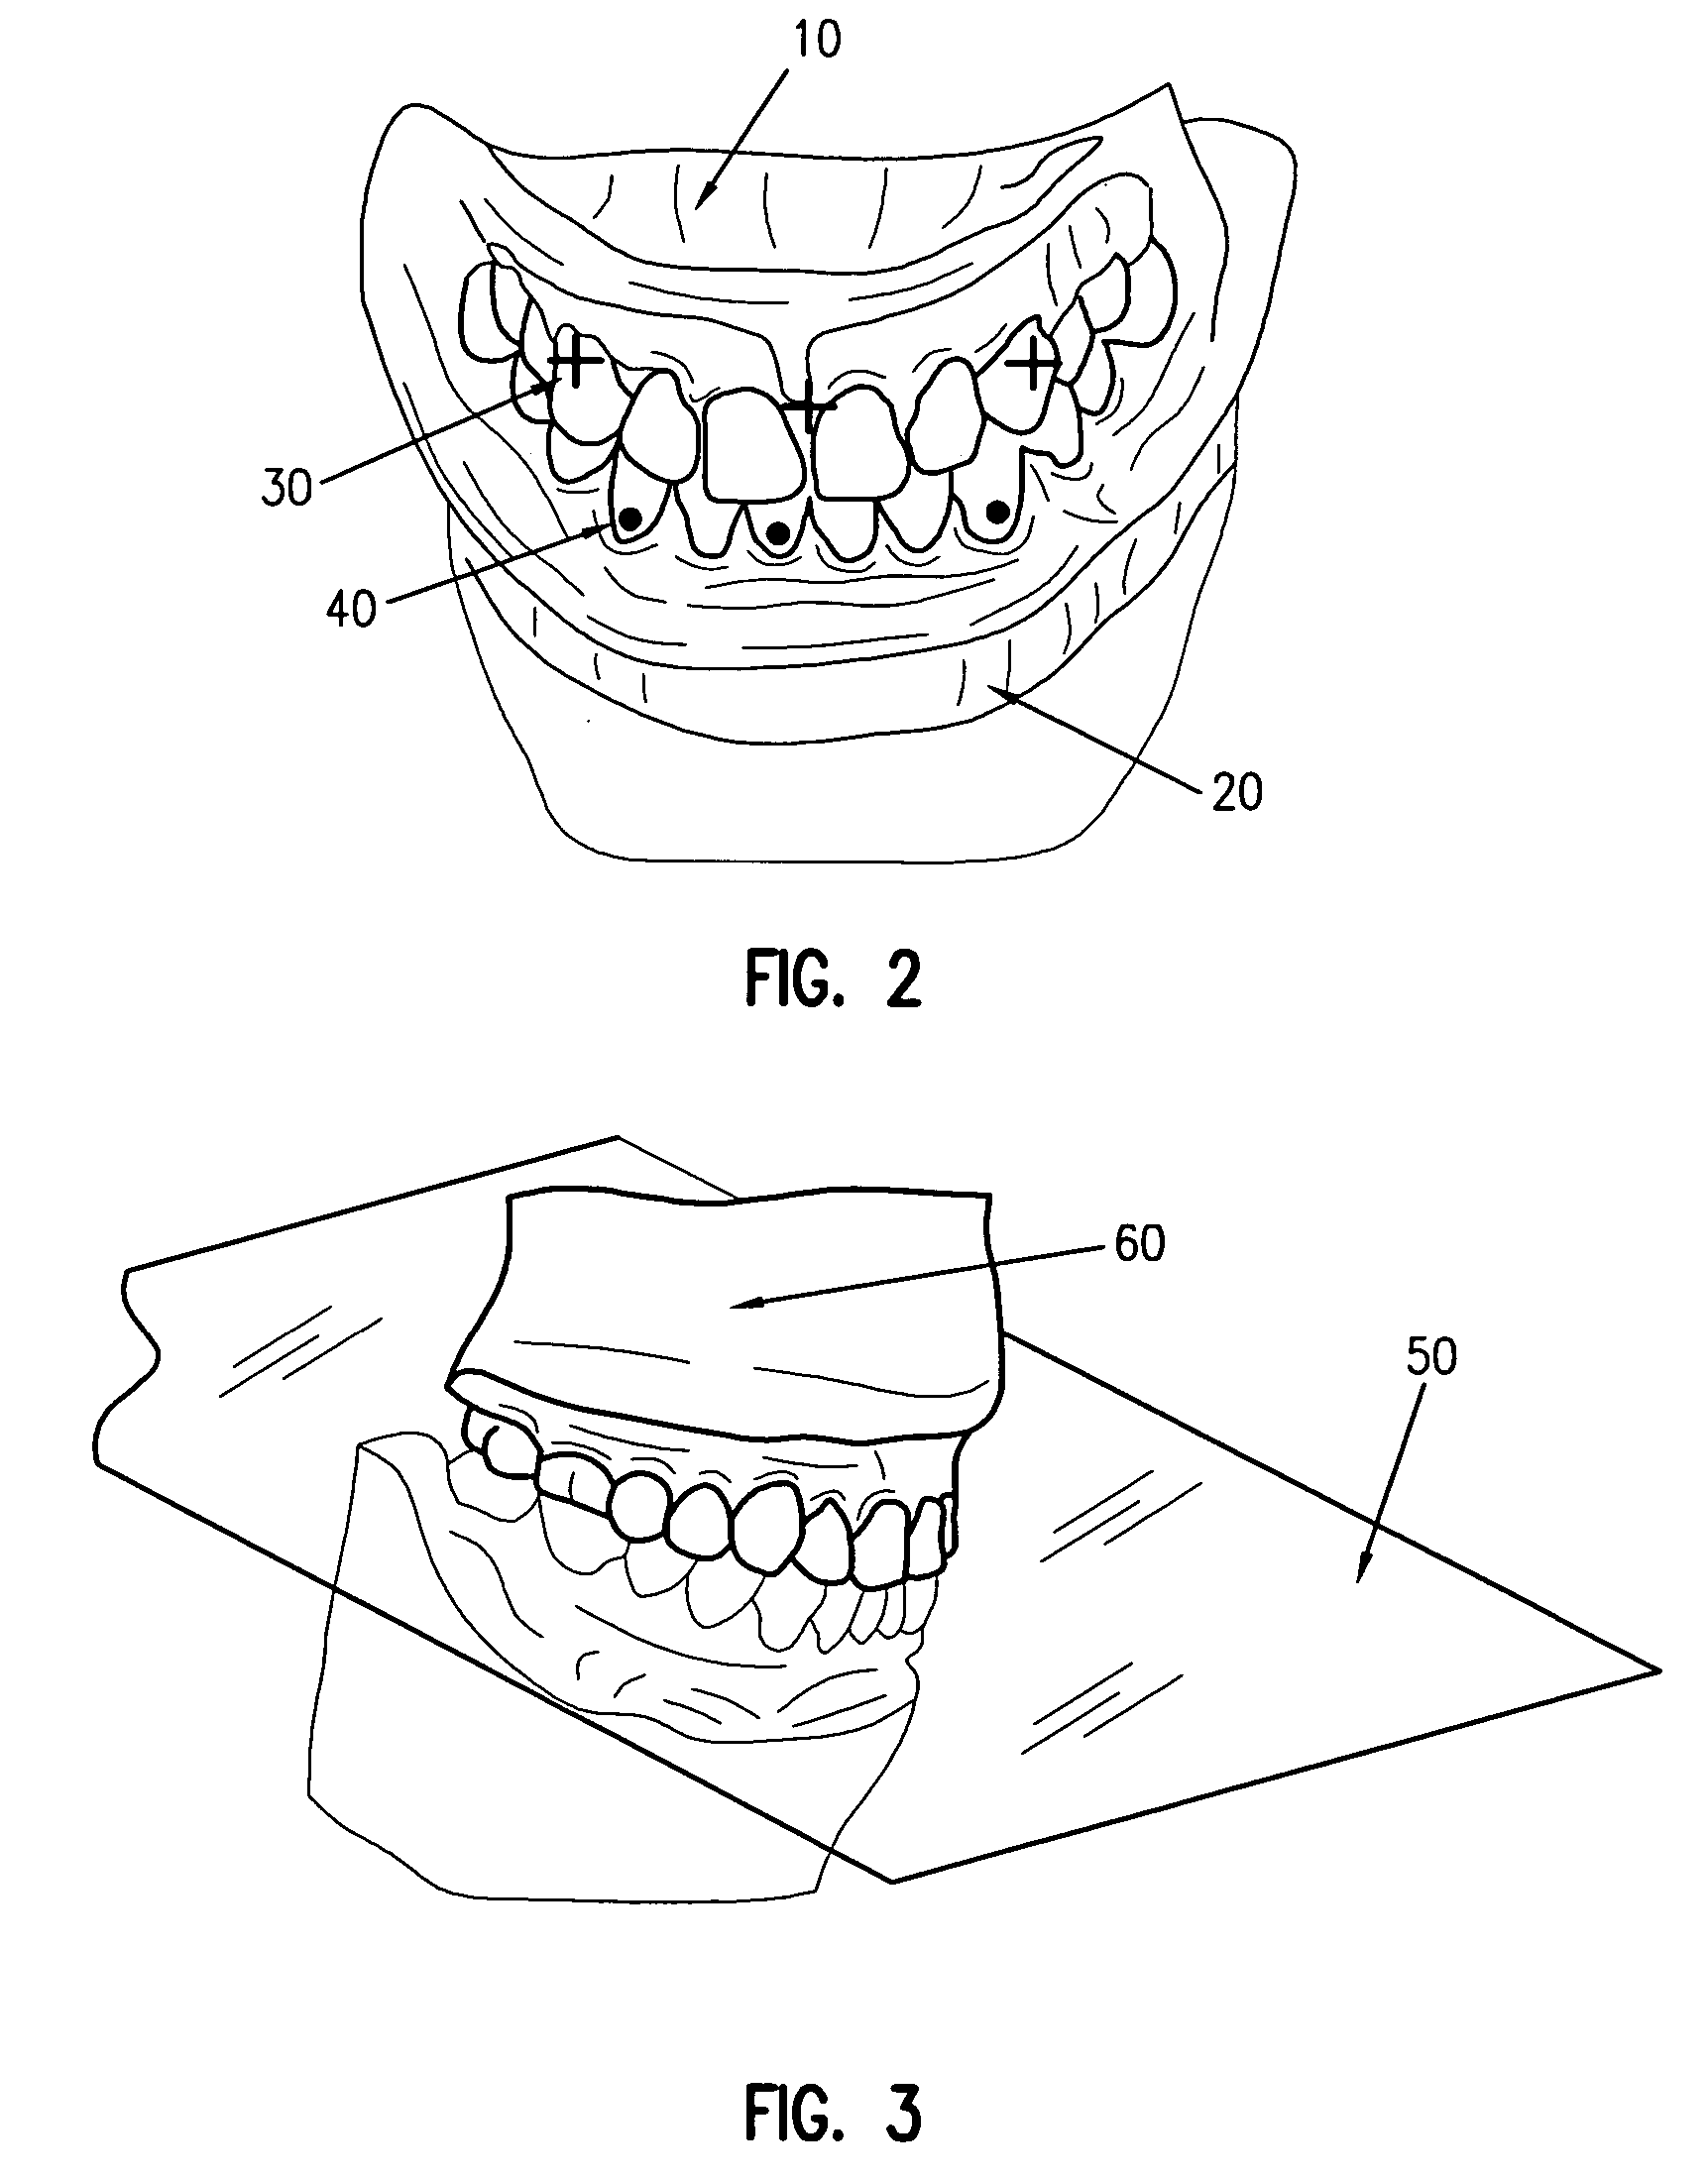 Digital manufacturing of removable oral appliances